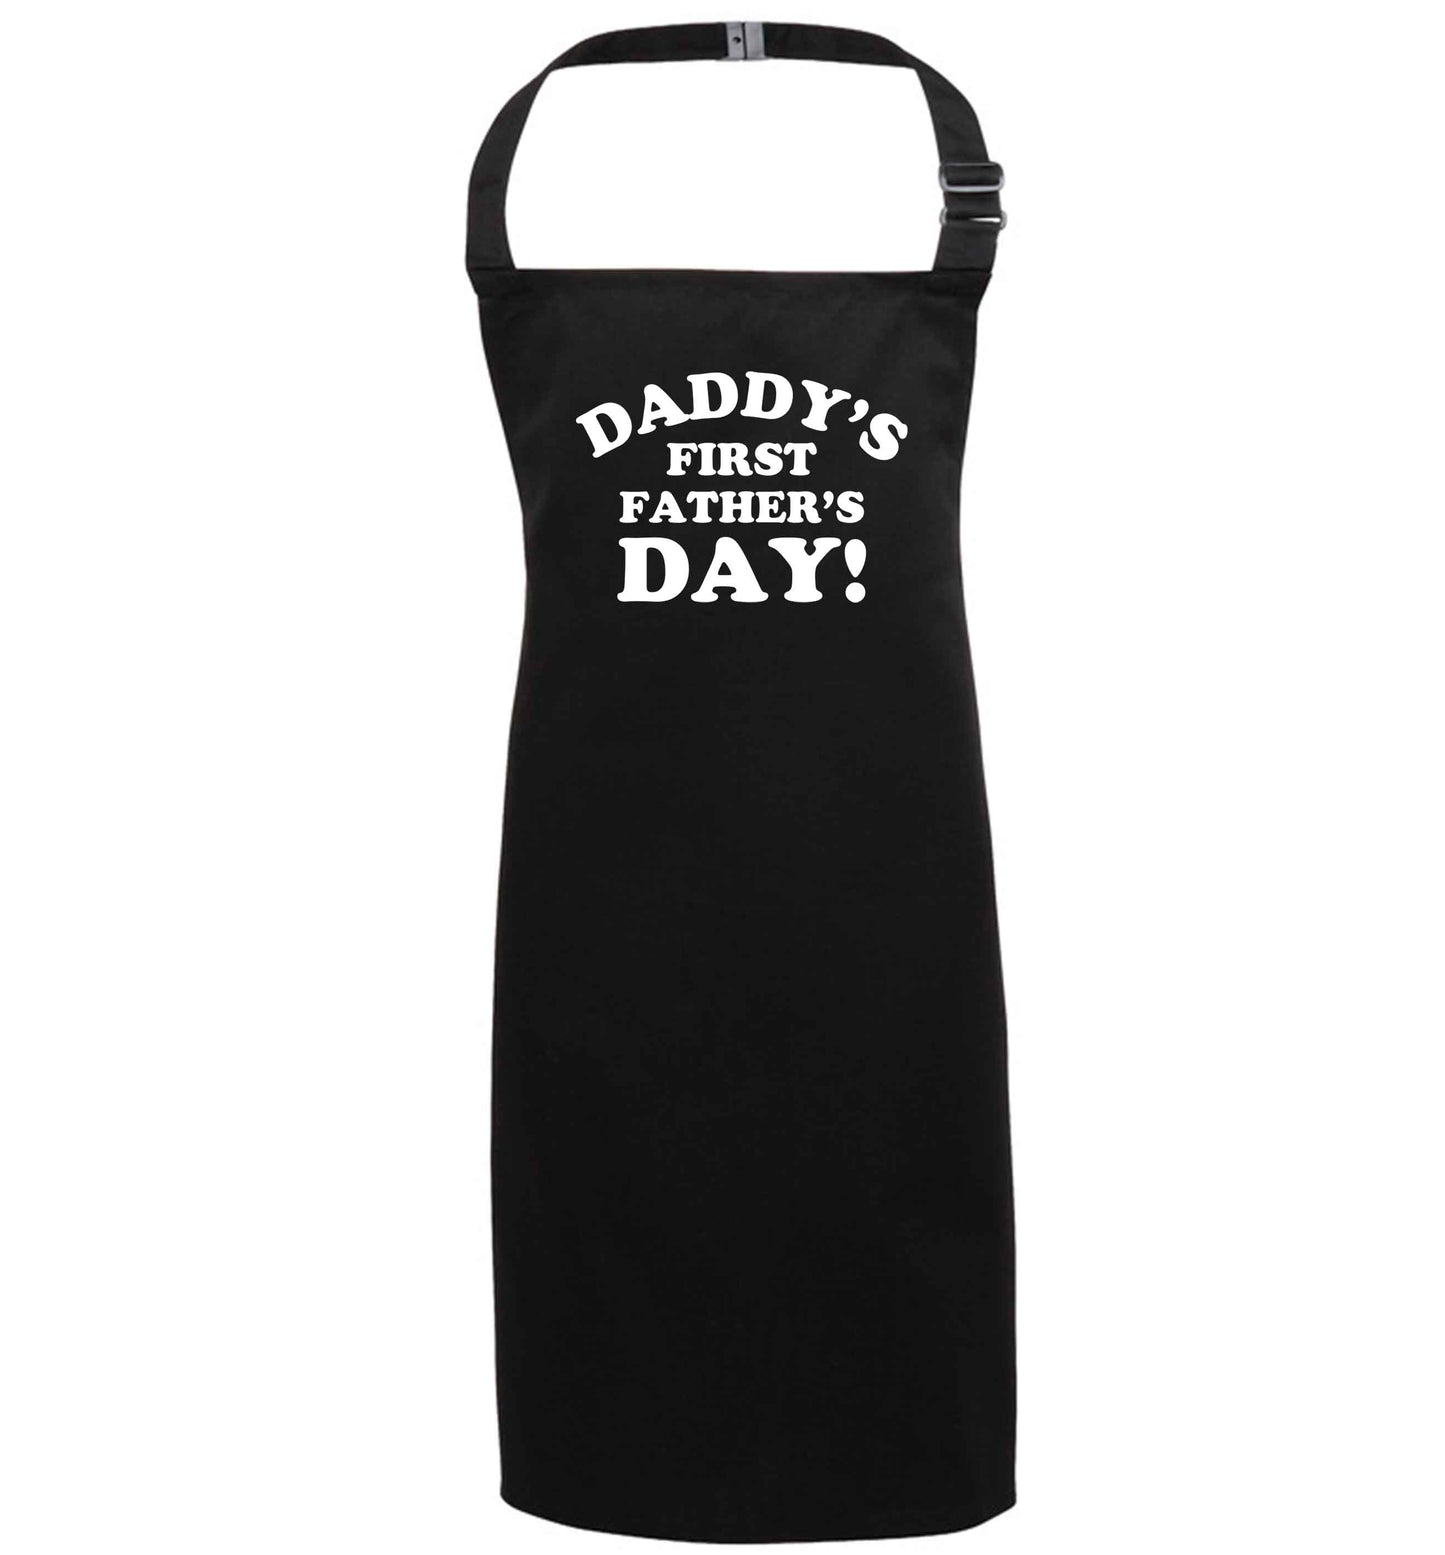 Daddy's first father's day black apron 7-10 years